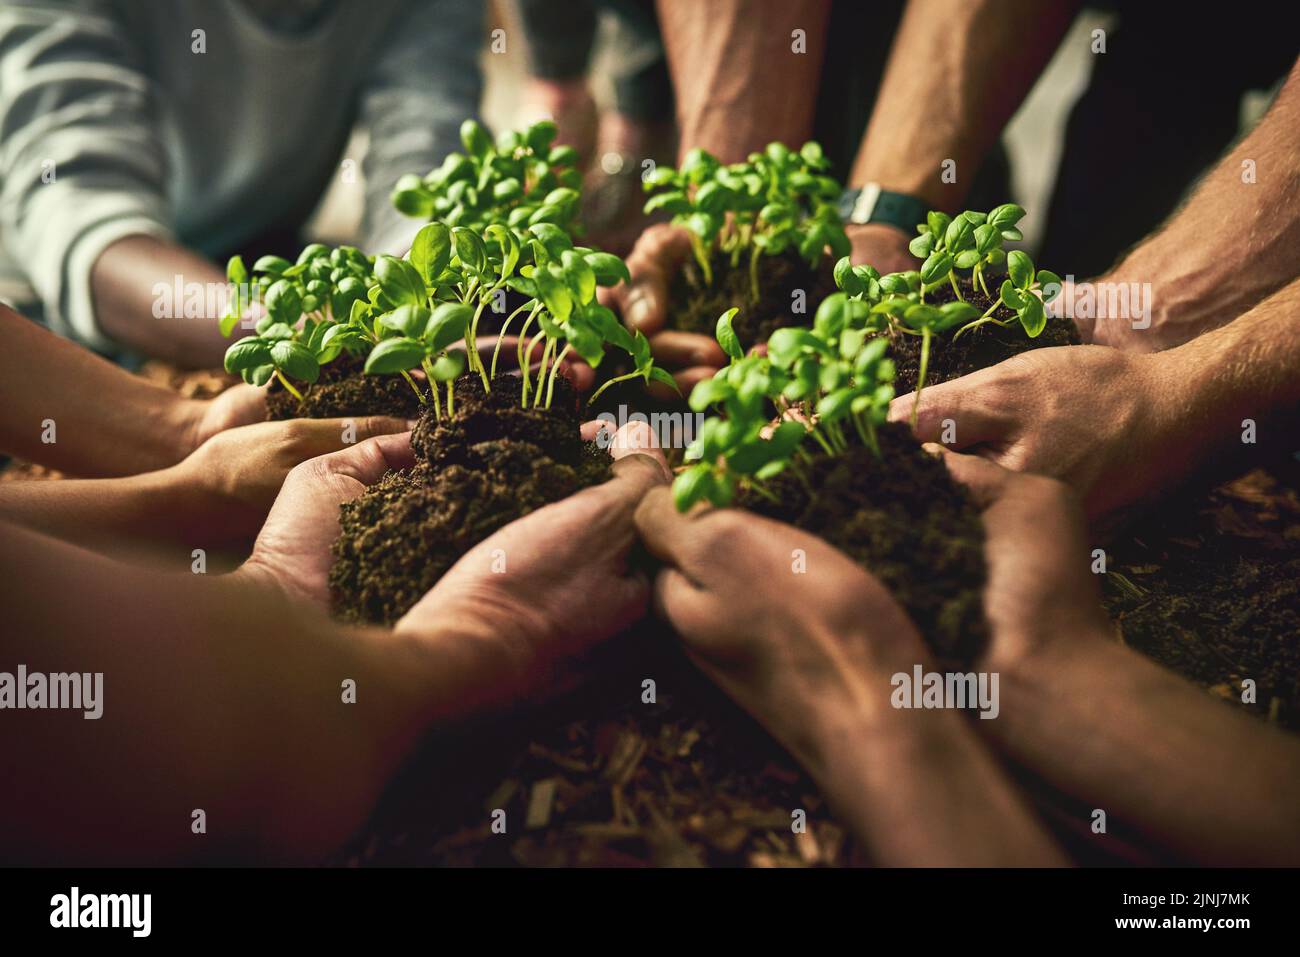 Hands planting fresh green plants showing healthy growth, progress and development. Closeup of diverse group of environmental conservation people Stock Photo